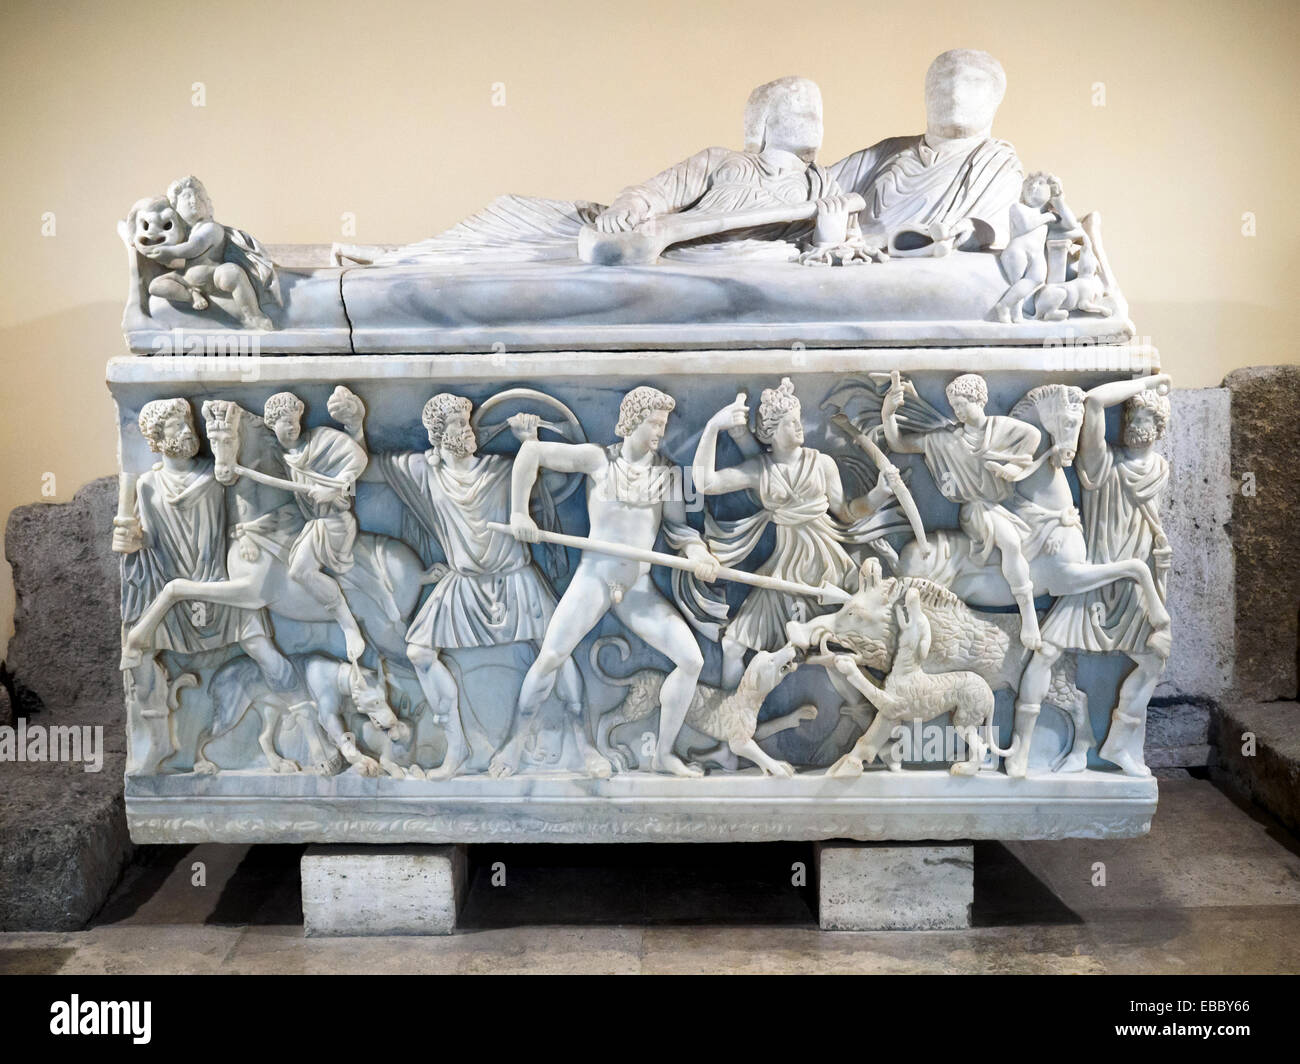 Sarcophagus with the Calydonian boar hunt Proconnesian marble At the center of the scene Meleager hunts the Calydonian boar before Artemis, the goddess of hunting. From Vicovaro, 1872 Musei Capitolini - Rome, Italy Stock Photo